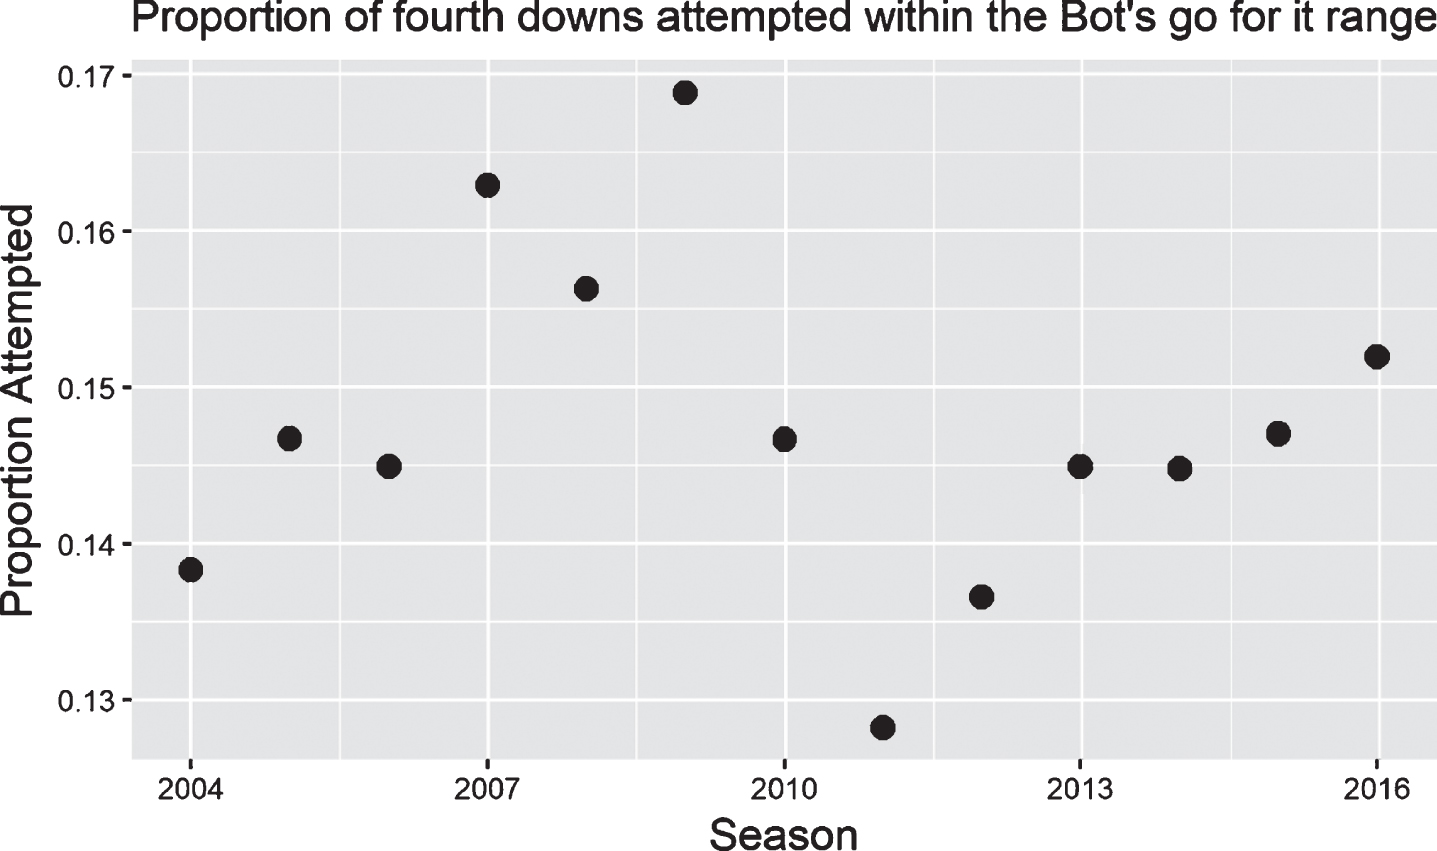 Proportion of times that teams with fourth down attempts within the ‘go for it’ range of The New York Times’ 4th Down Bot actually went for it, per season. There is no evidence that teams have increased their rates of going for it over time.